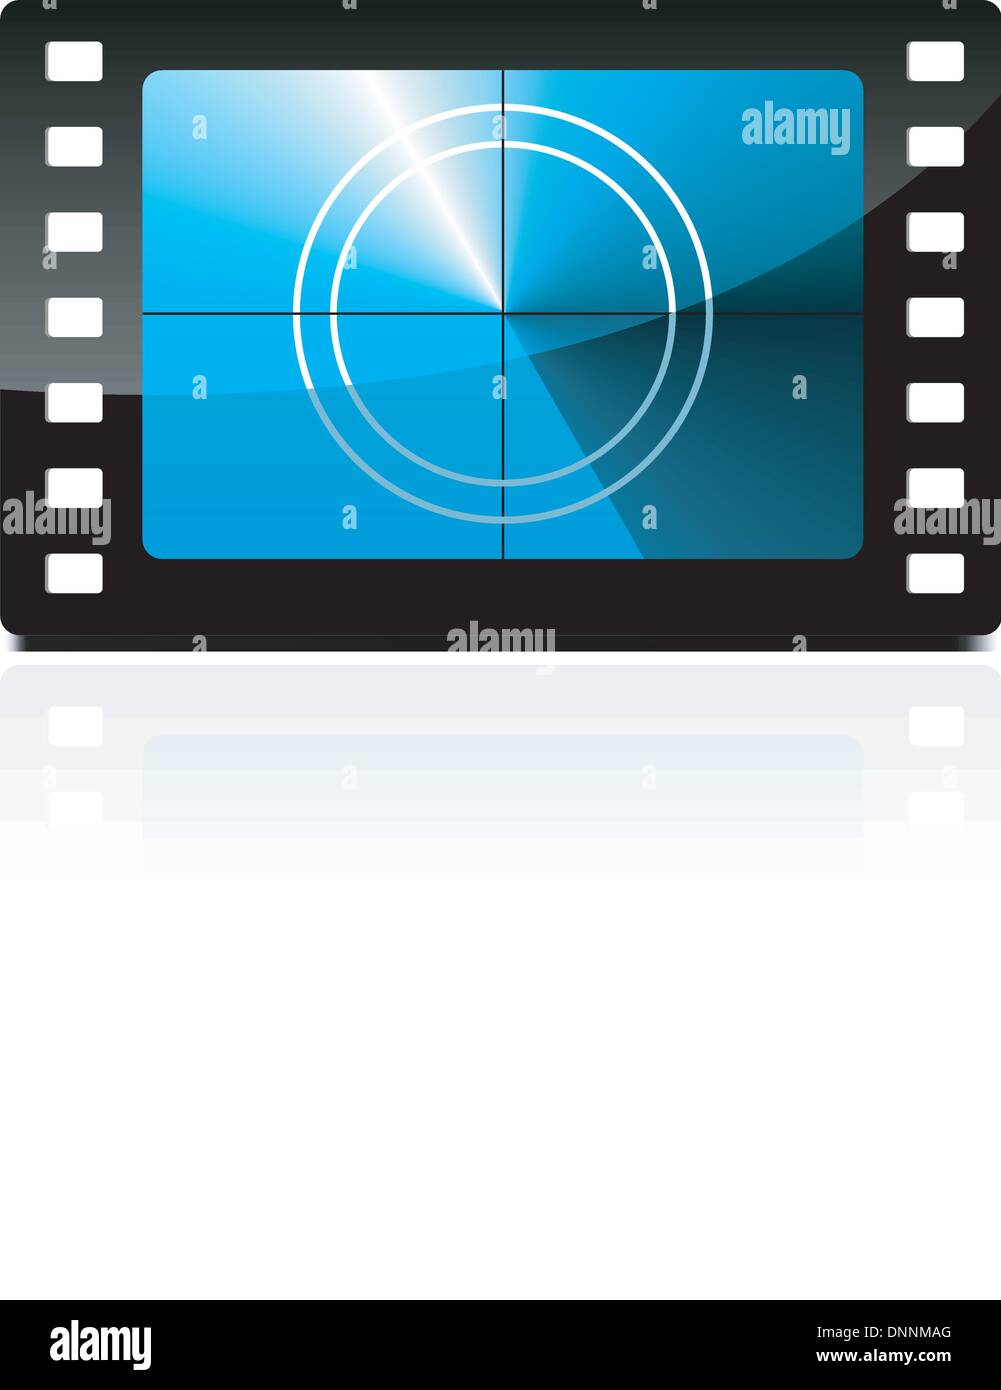 Film countdown from 1 to 9 set. Vector. Stock Vector